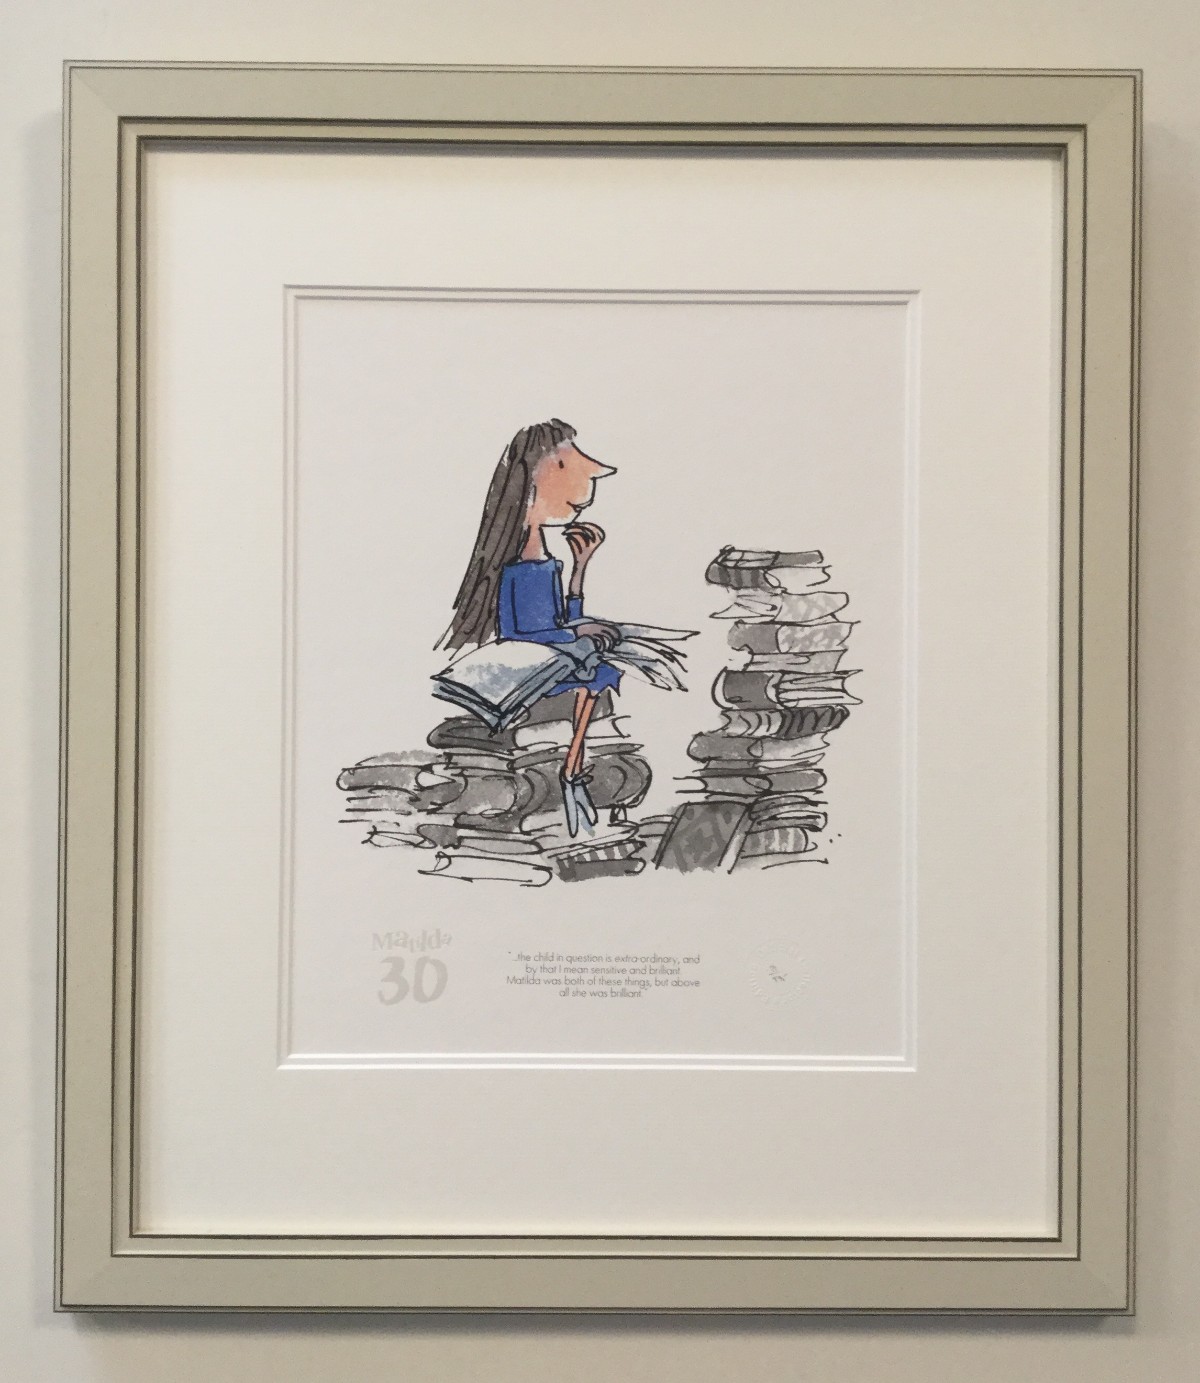 Matilda 30th - The Child in Question is Extra-ordinary by Quentin Blake